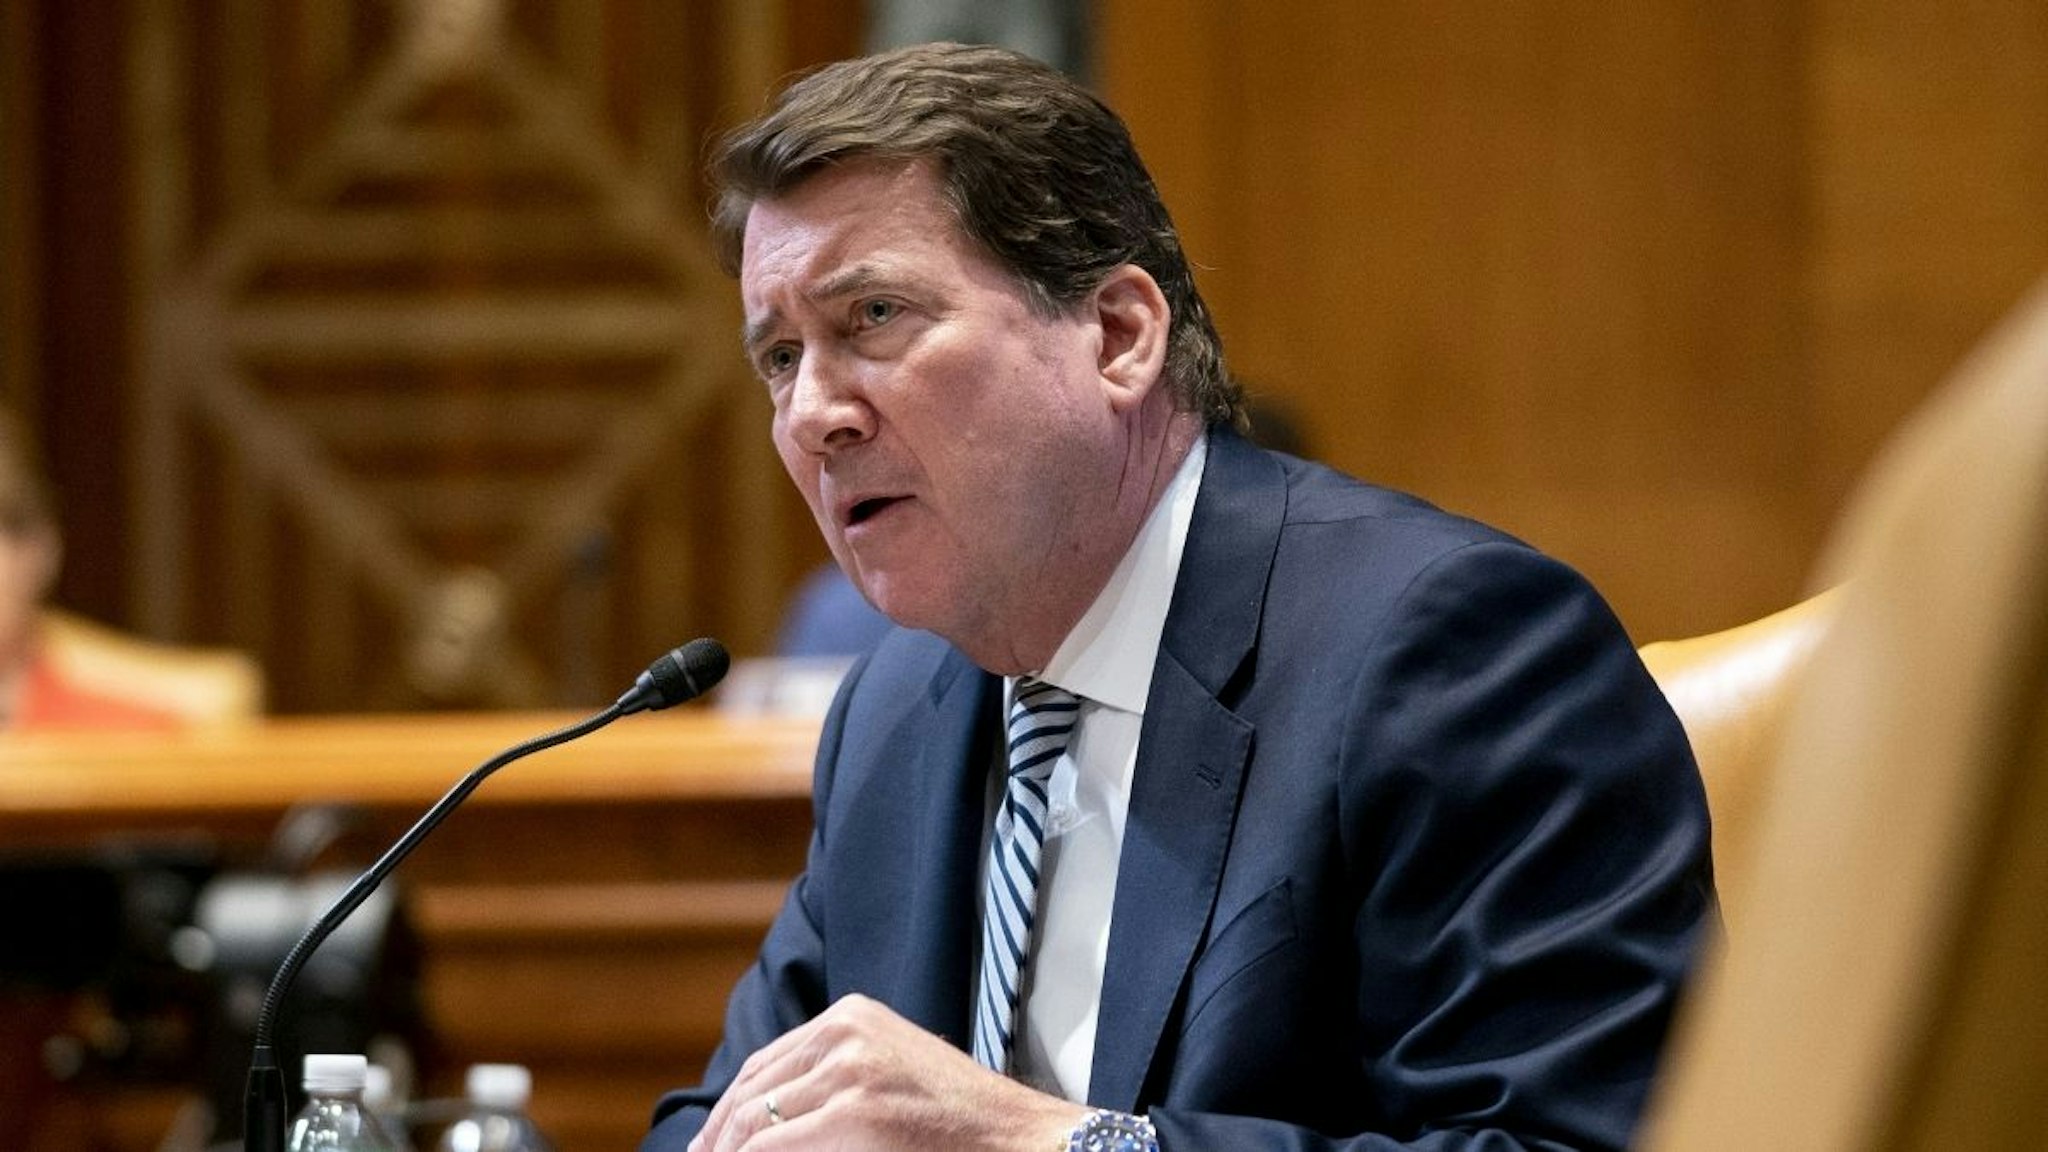 Senator Bill Hagerty, a Republican from Tennessee, speaks during a Senate Appropriations Subcommittee hearing in Washington, D.C., U.S., on Tuesday, April 26, 2022.